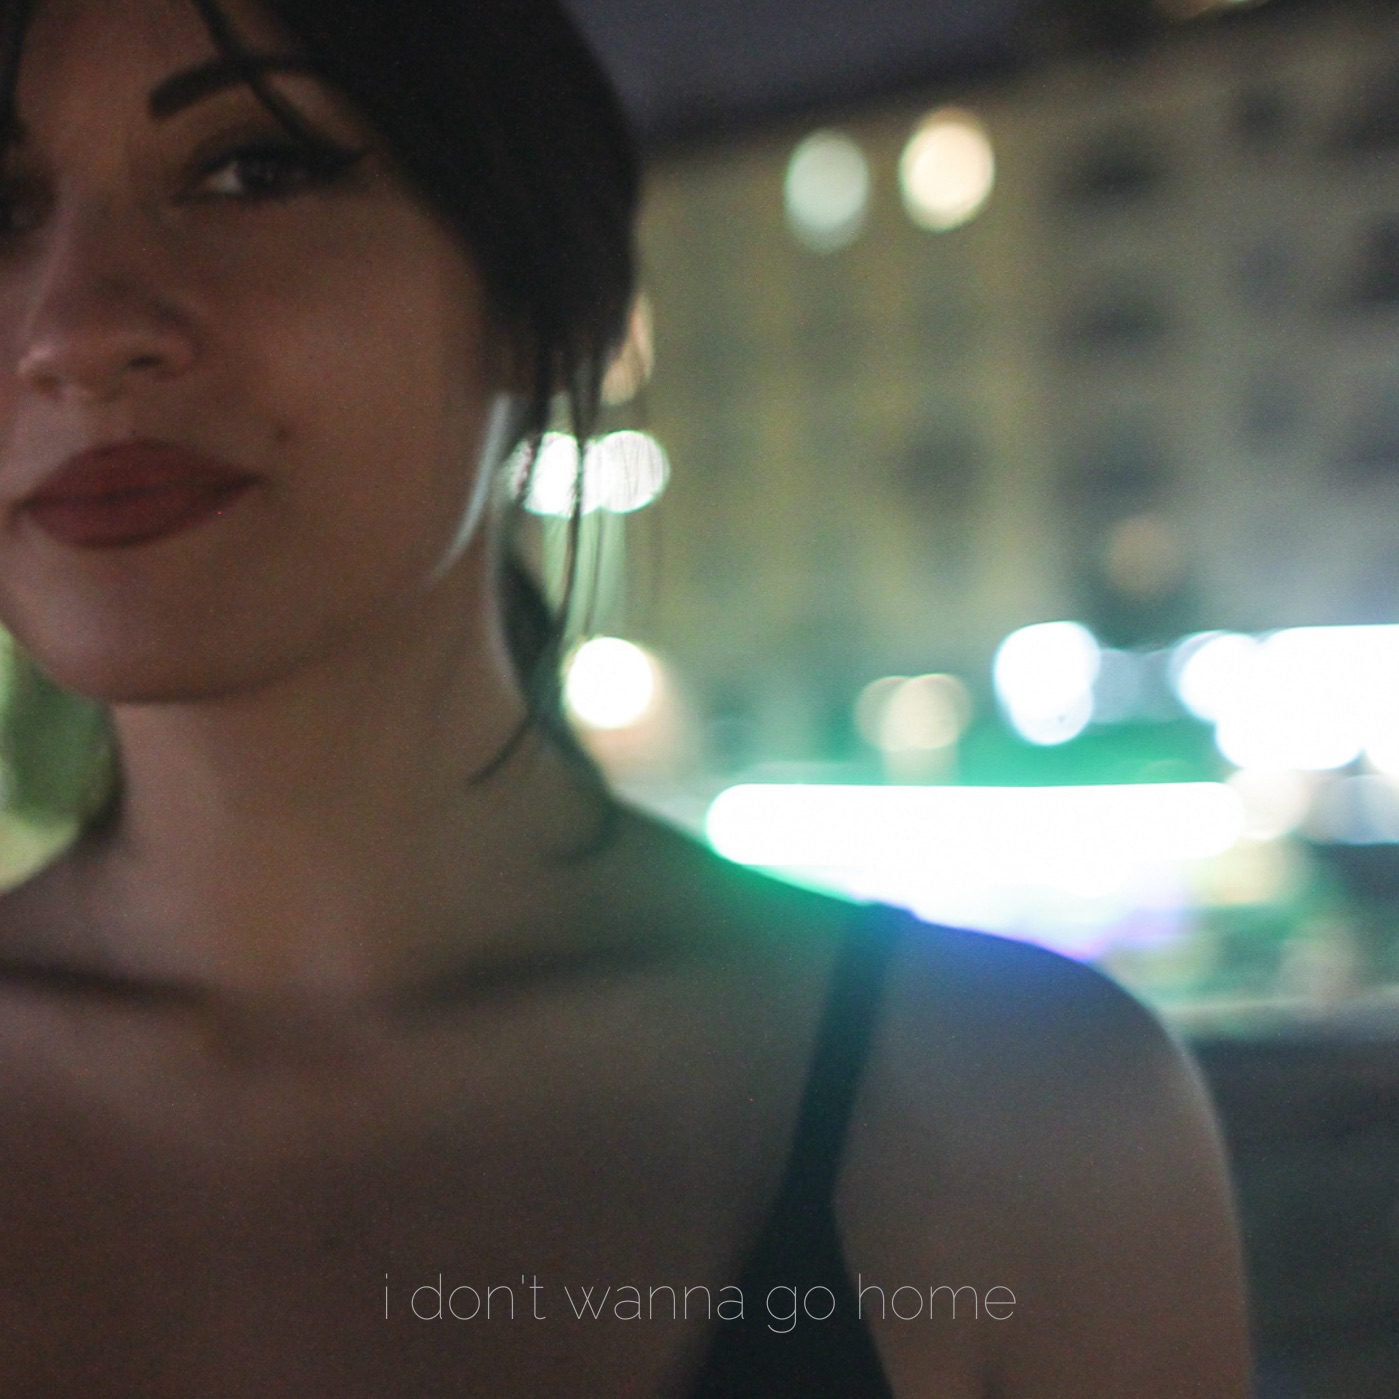 i don't wanna go home - karhys - italy - malta - indie - indie music - indie pop - new music - music blog - wolf in a suit - wolfinasuit - wolf in a suit blog - wolf in a suit music blog